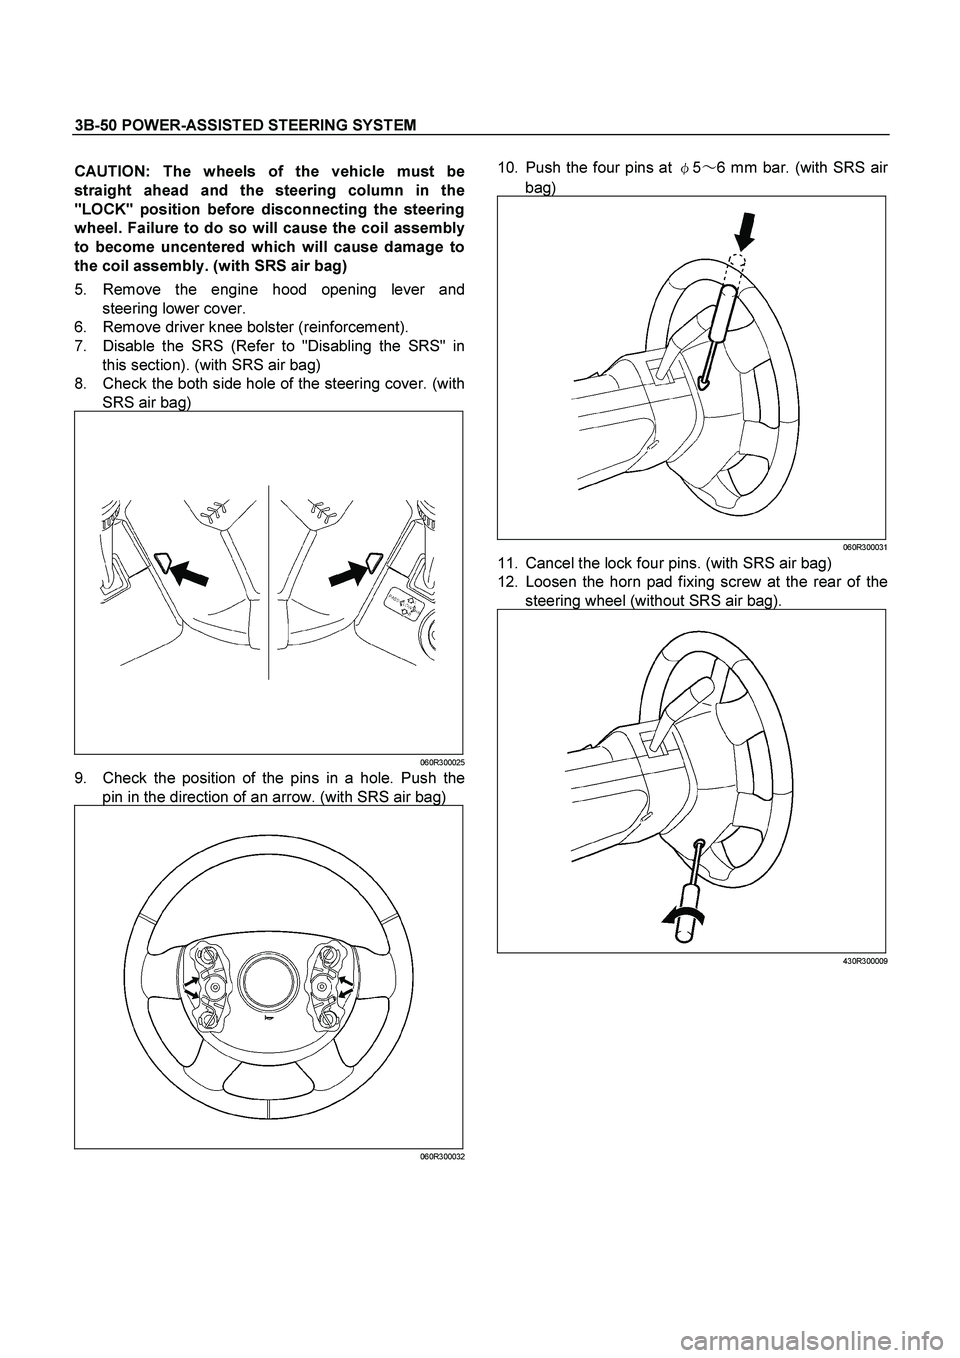 ISUZU TF SERIES 2004 Repair Manual 3B-50 POWER-ASSISTED STEERING SYSTEM
 
CAUTION: The wheels of the vehicle must be
straight ahead and the steering column in the
"LOCK" position before disconnecting the steering
wheel. Failure to do s